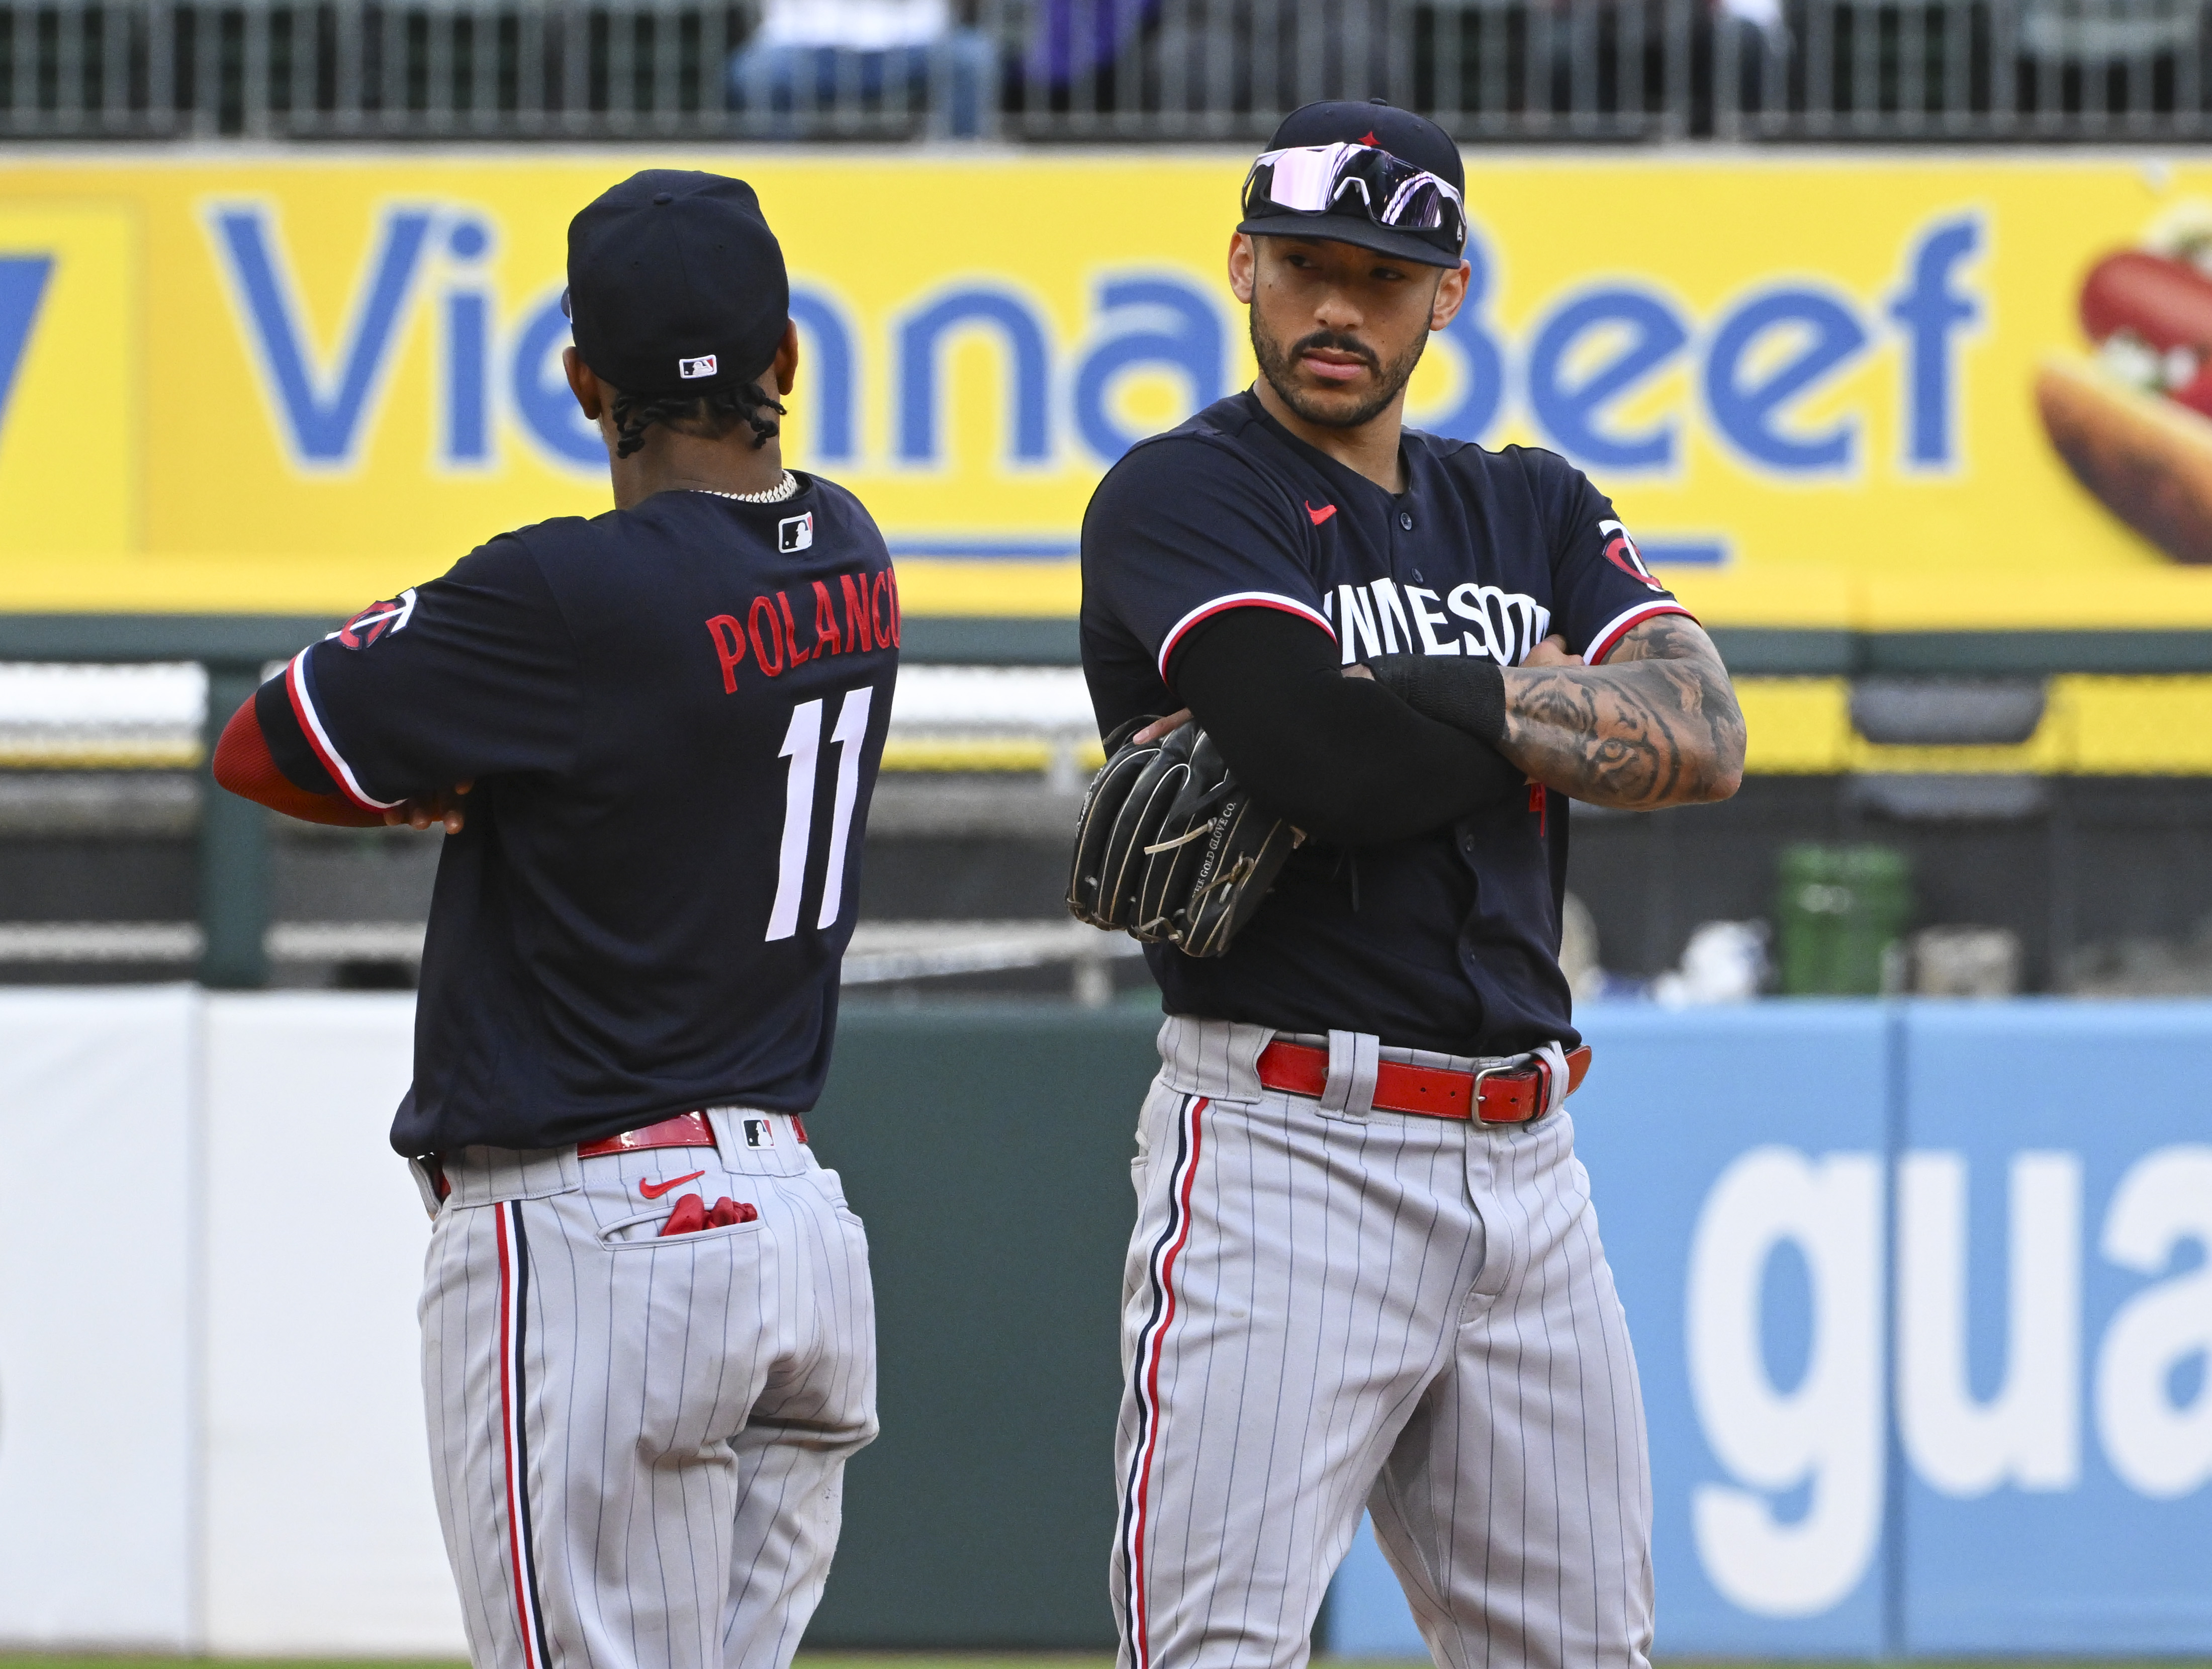 Jorge Polanco and Carlos Correa of the Minnesota Twins celebrate their team win over the Chicago White Sox at Guaranteed Rate Field on September 17, 2023 in Chicago, Illinois. The Twins defeated the White Sox 4-0.